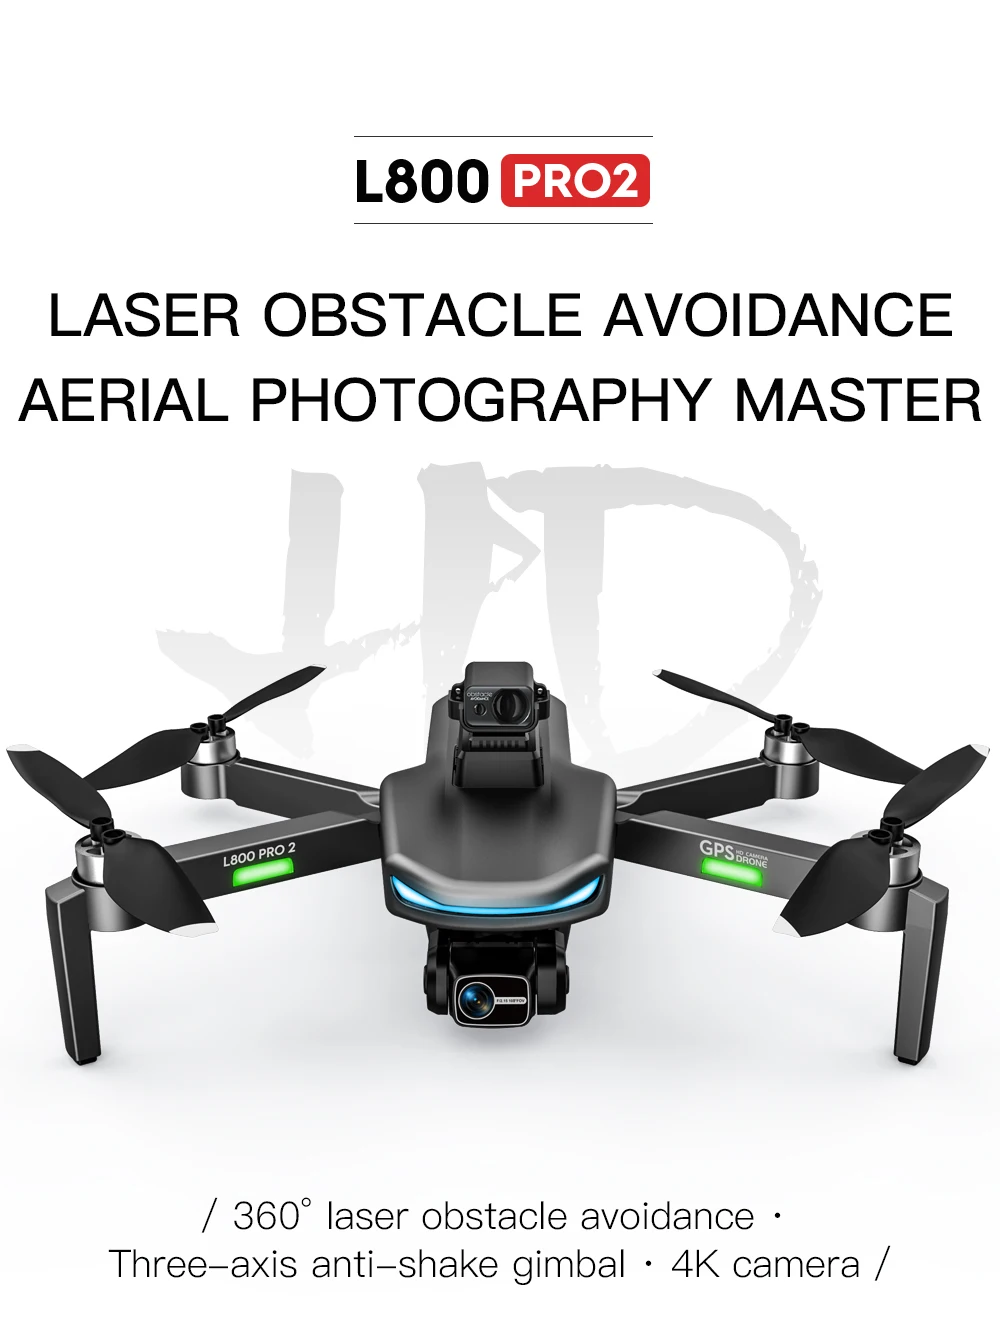 2022 NEW L800 Pro2 drone 4k profesional GPS 8K HD Dual Camera Laser Obstacle Avoidance Three-Axis Gimbal Brushless Quadcopter phantom 6 ch remote control quadcopter